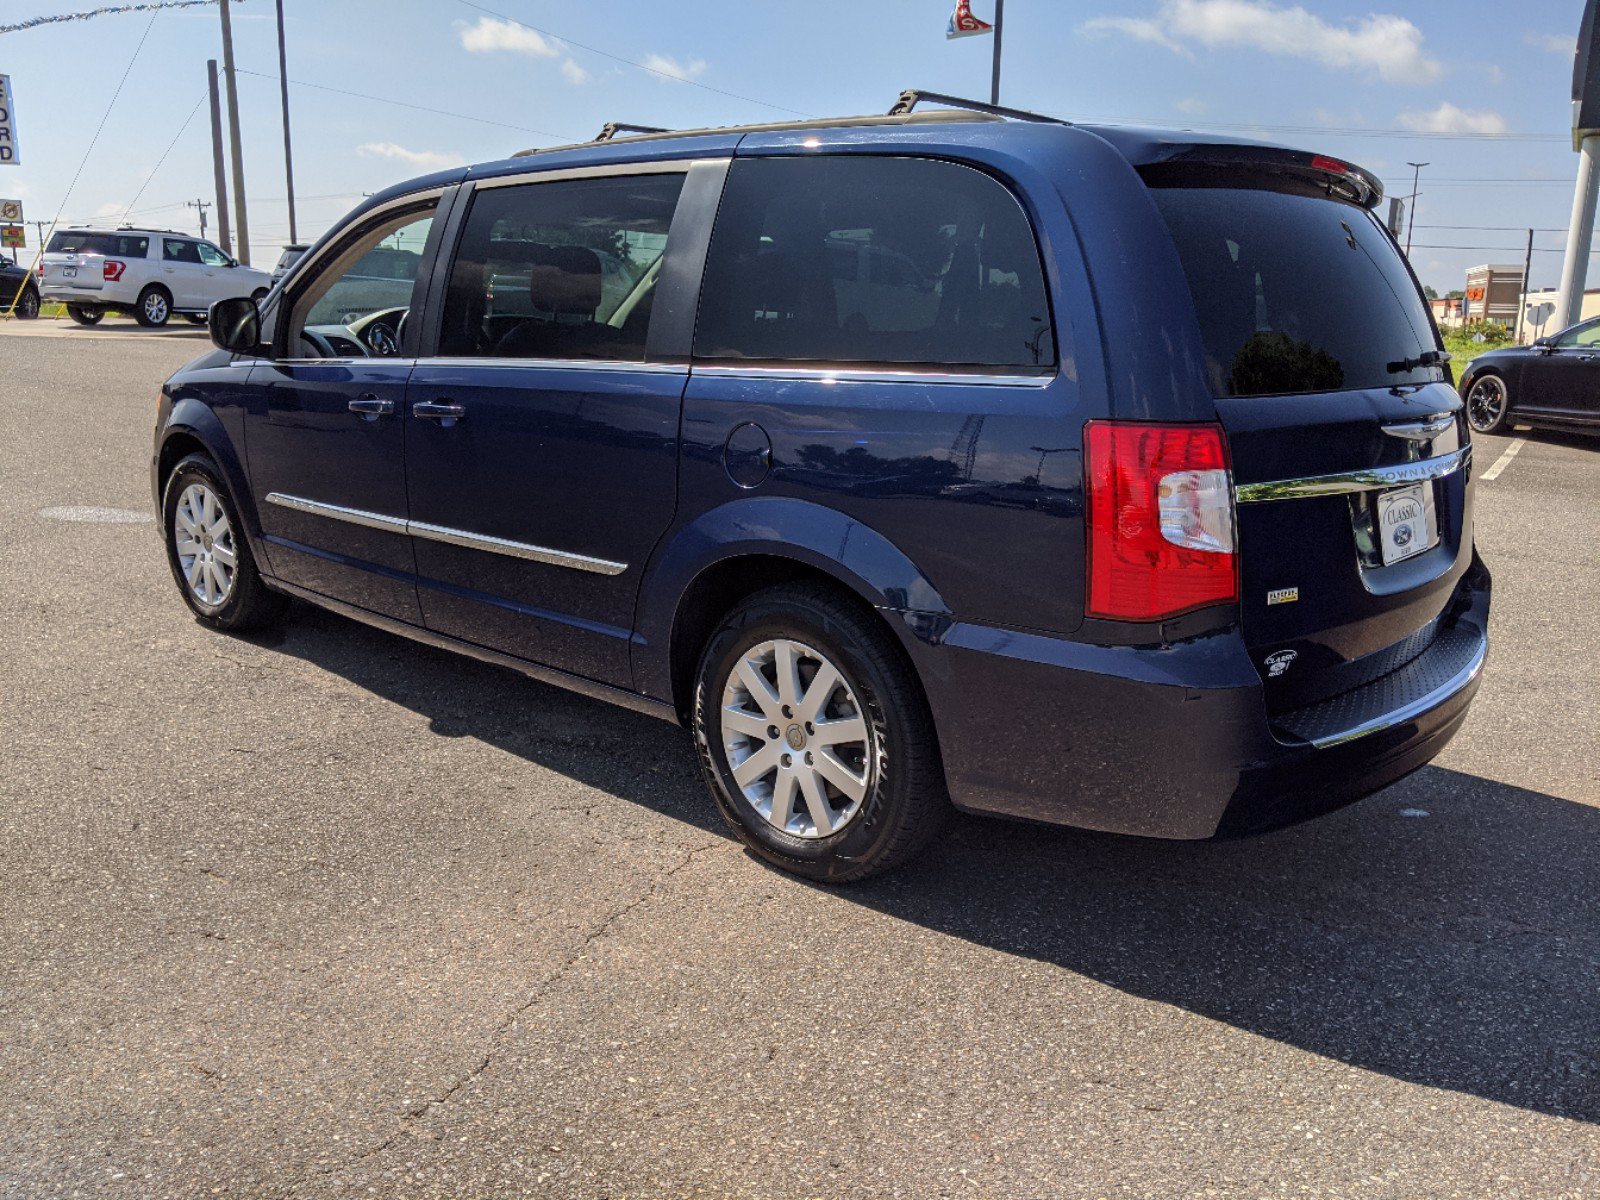 PreOwned 2015 Chrysler Town & Country Touring With Navigation